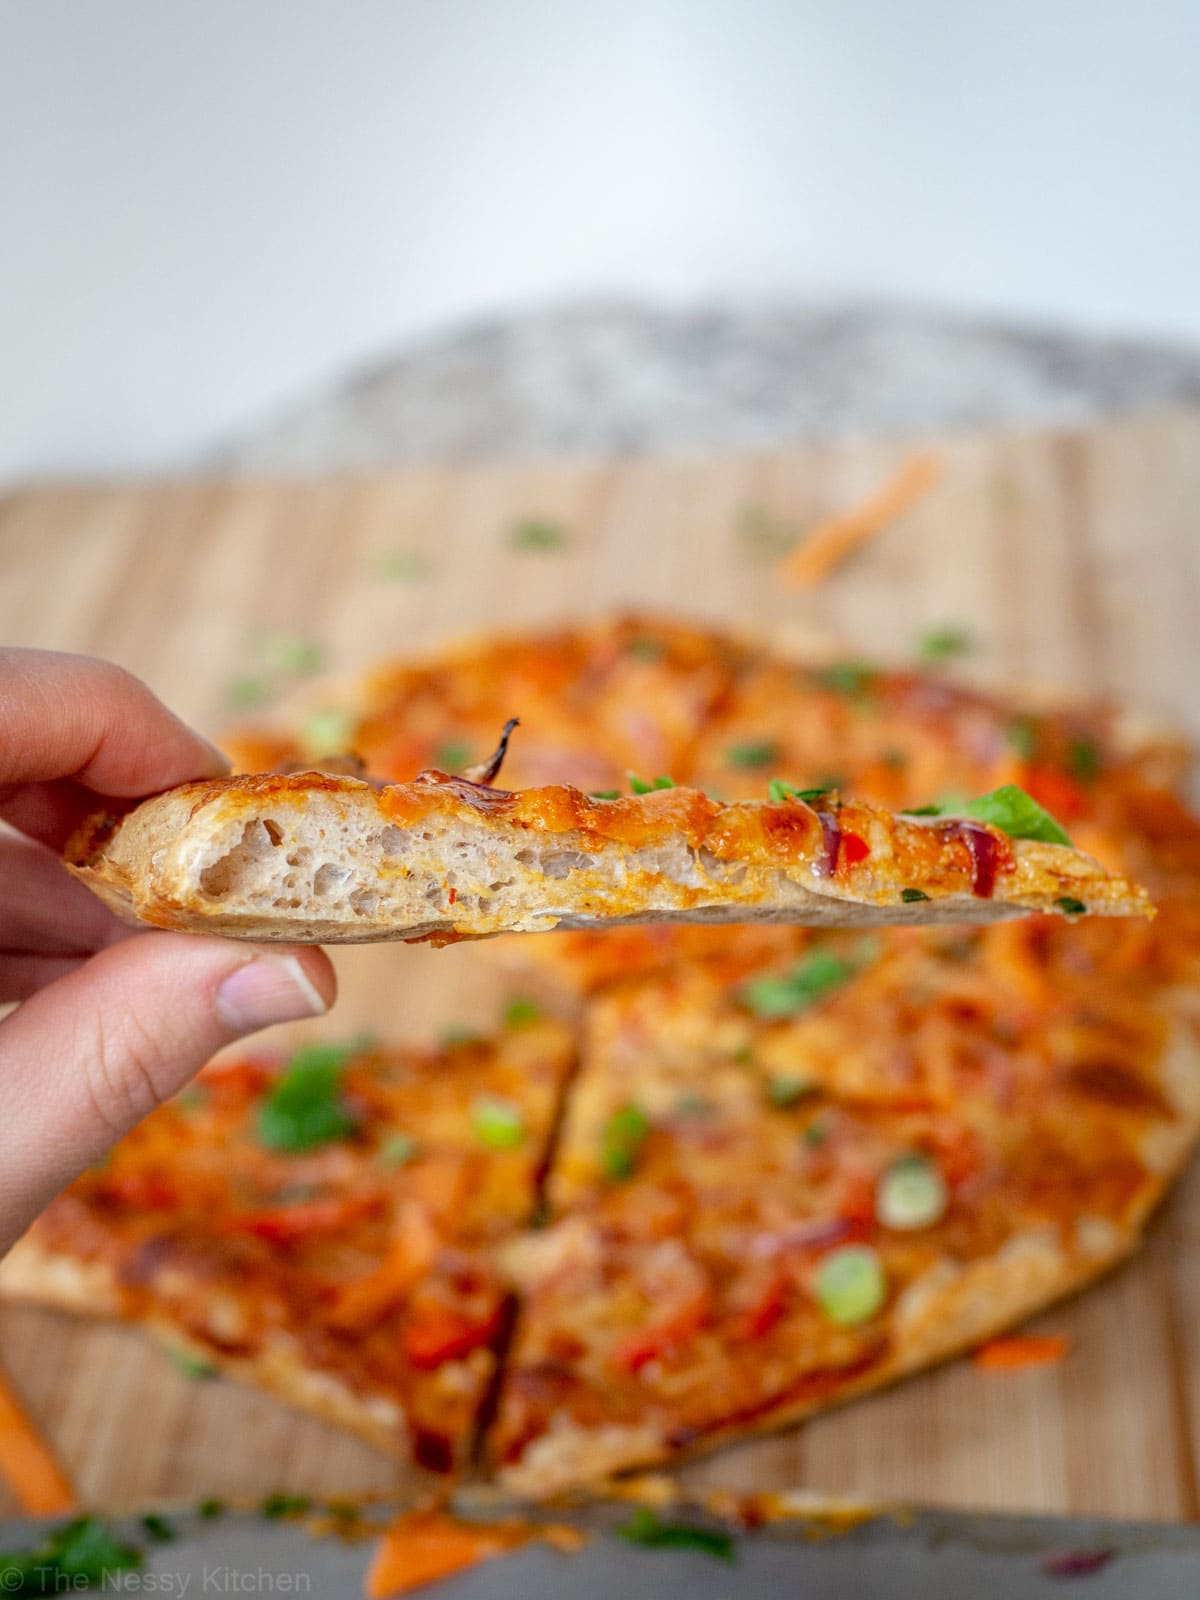 Slice of Thai curry pizza on homemade whole wheat artisan pizza crust.